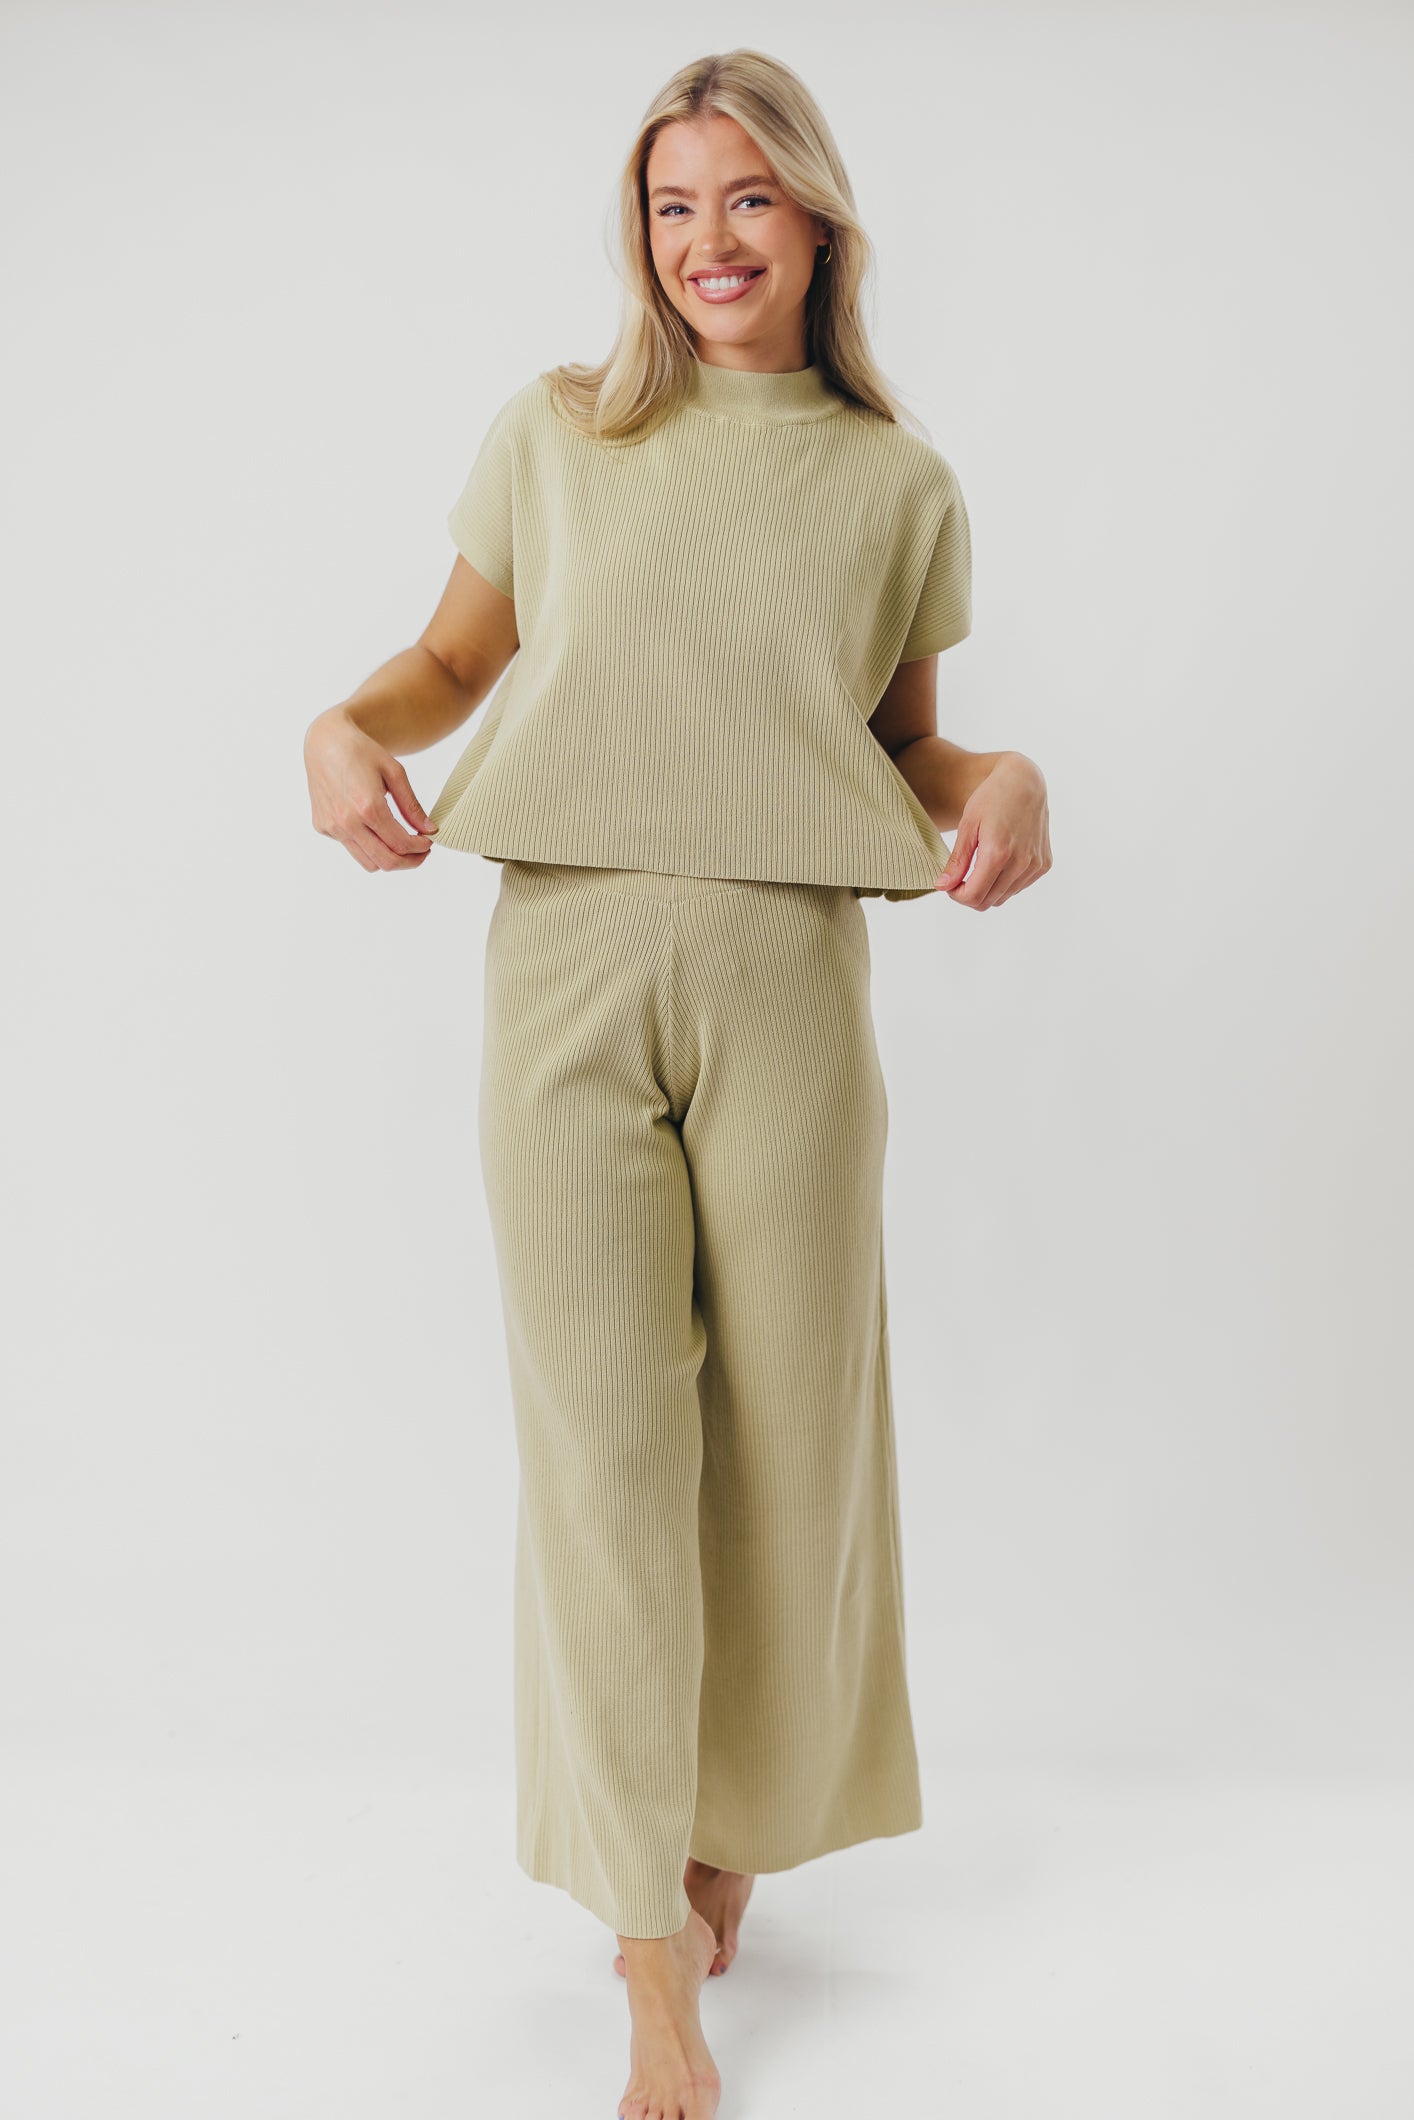 Tripp Knit Top and Pant Set in Avocado